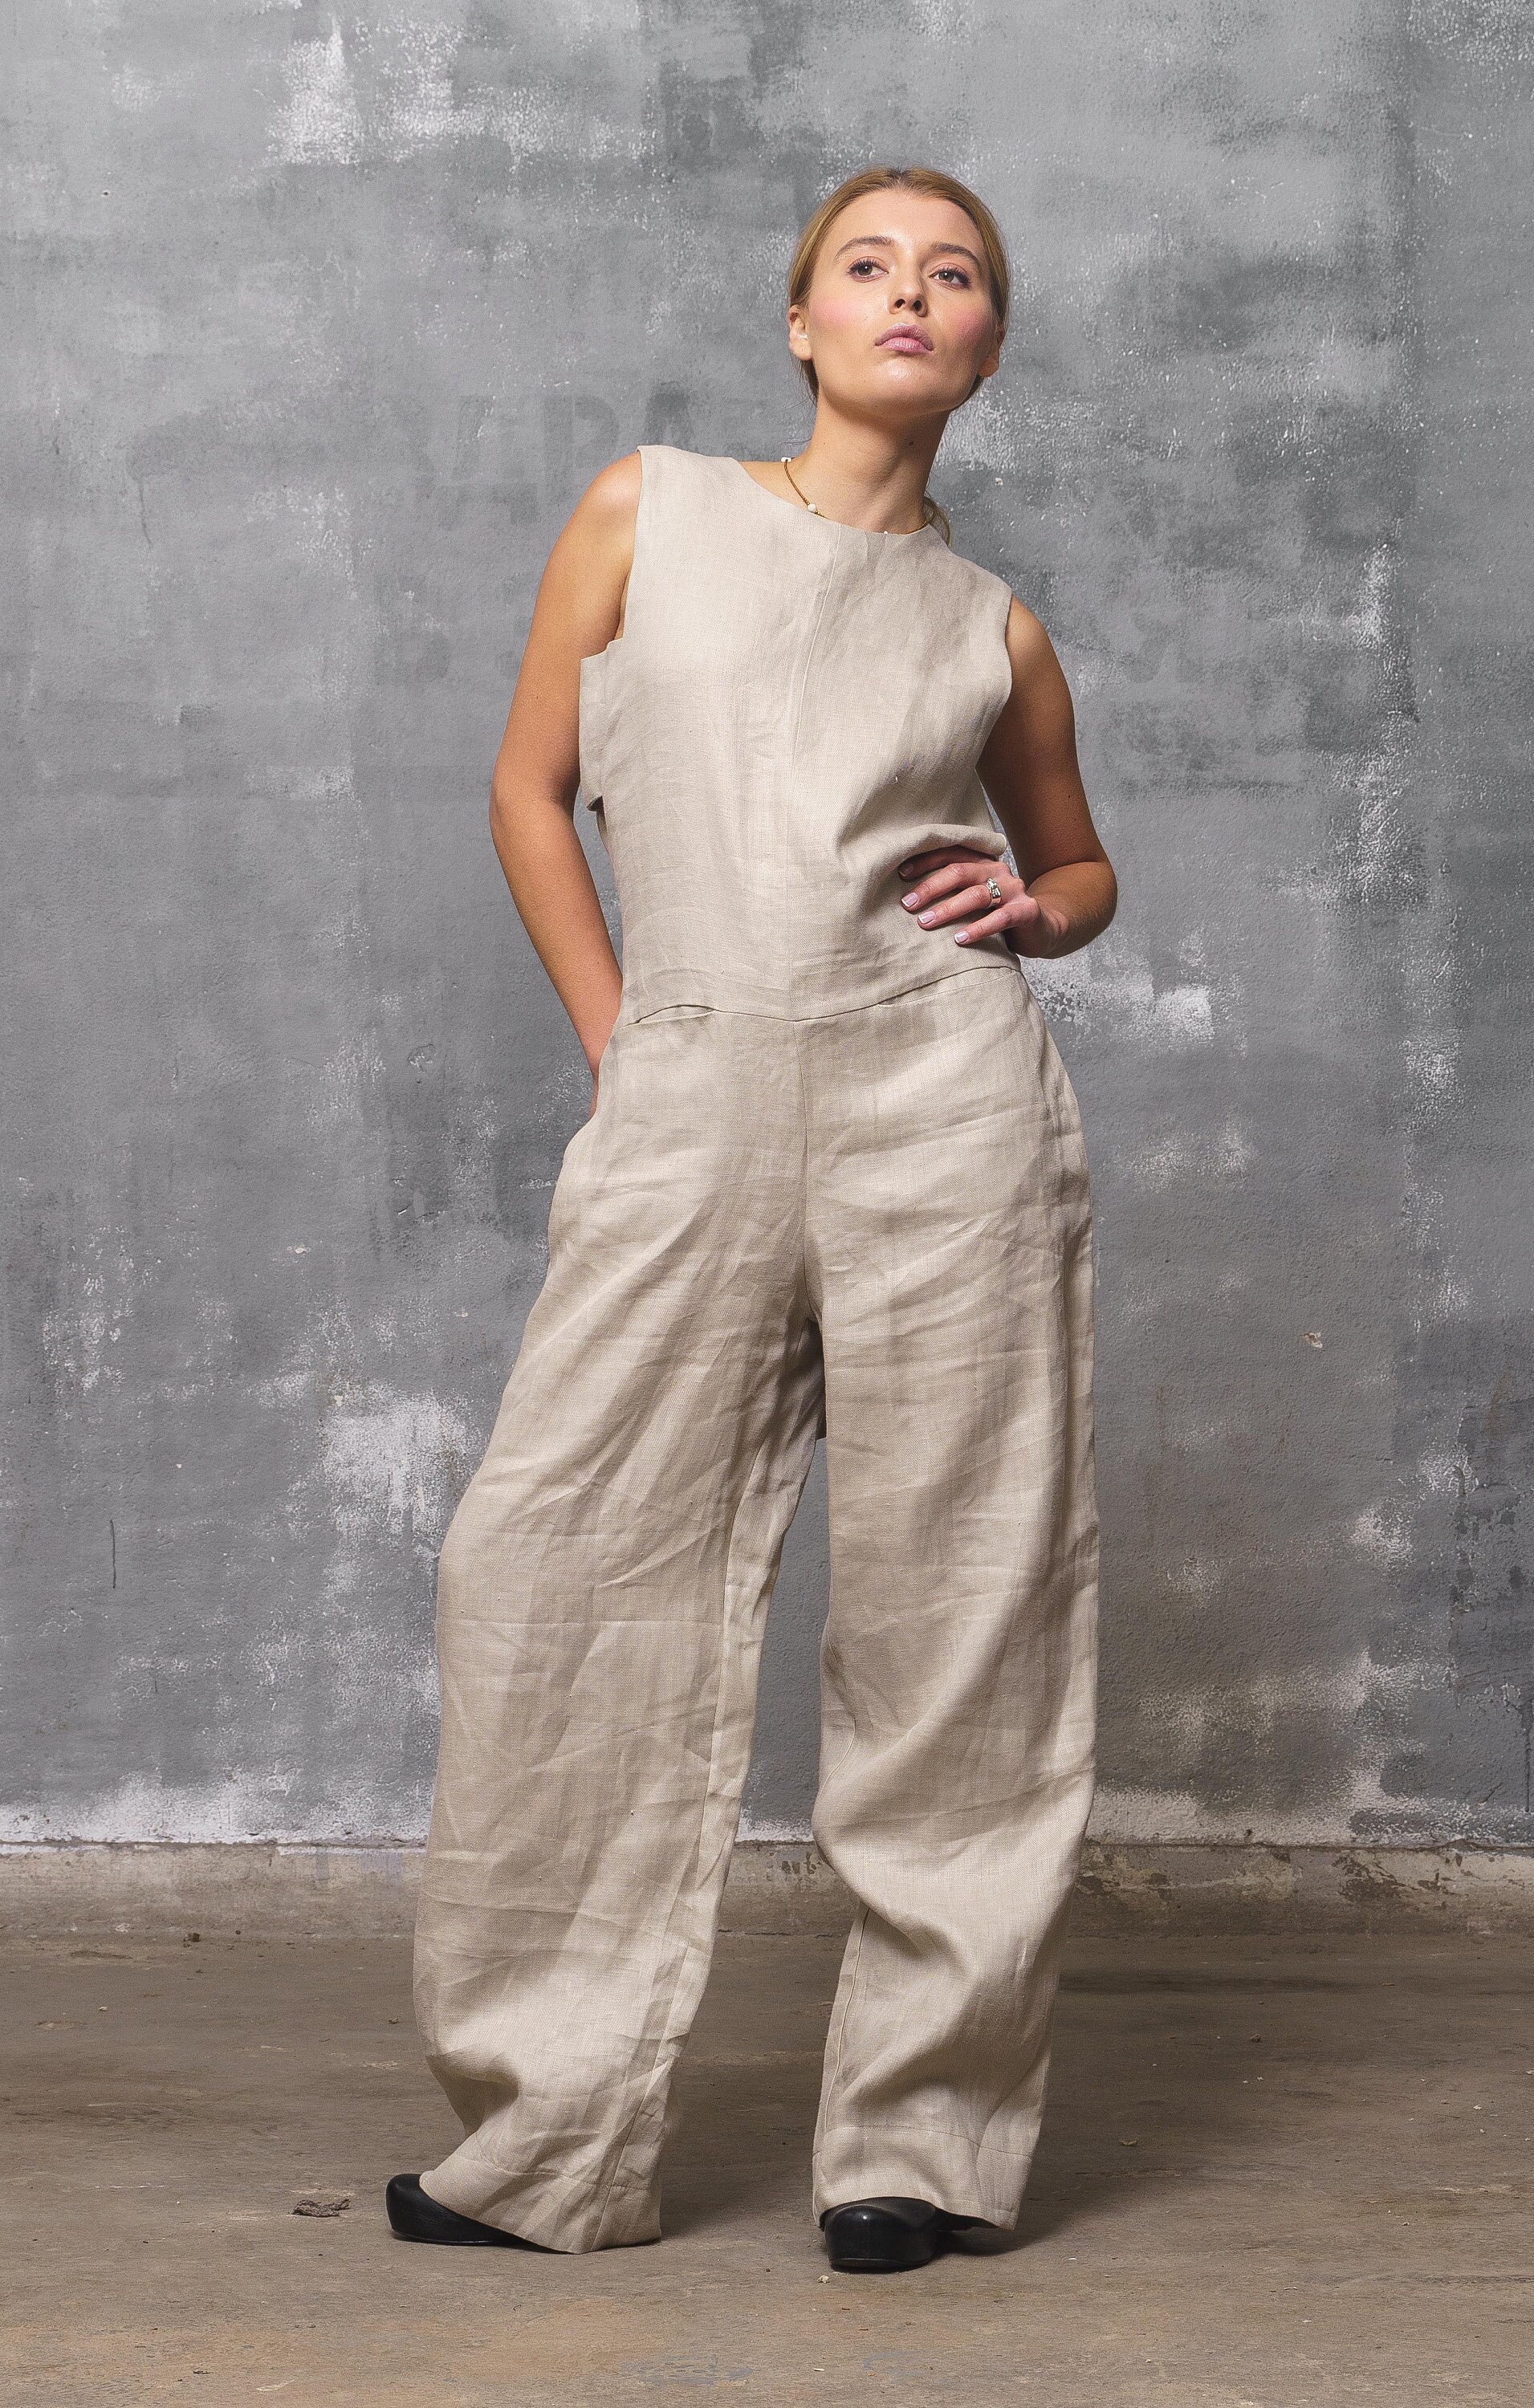 Ayelin Jumpsuit - Linen Look Relaxed 3/4 Sleeve Jumpsuit in Cream